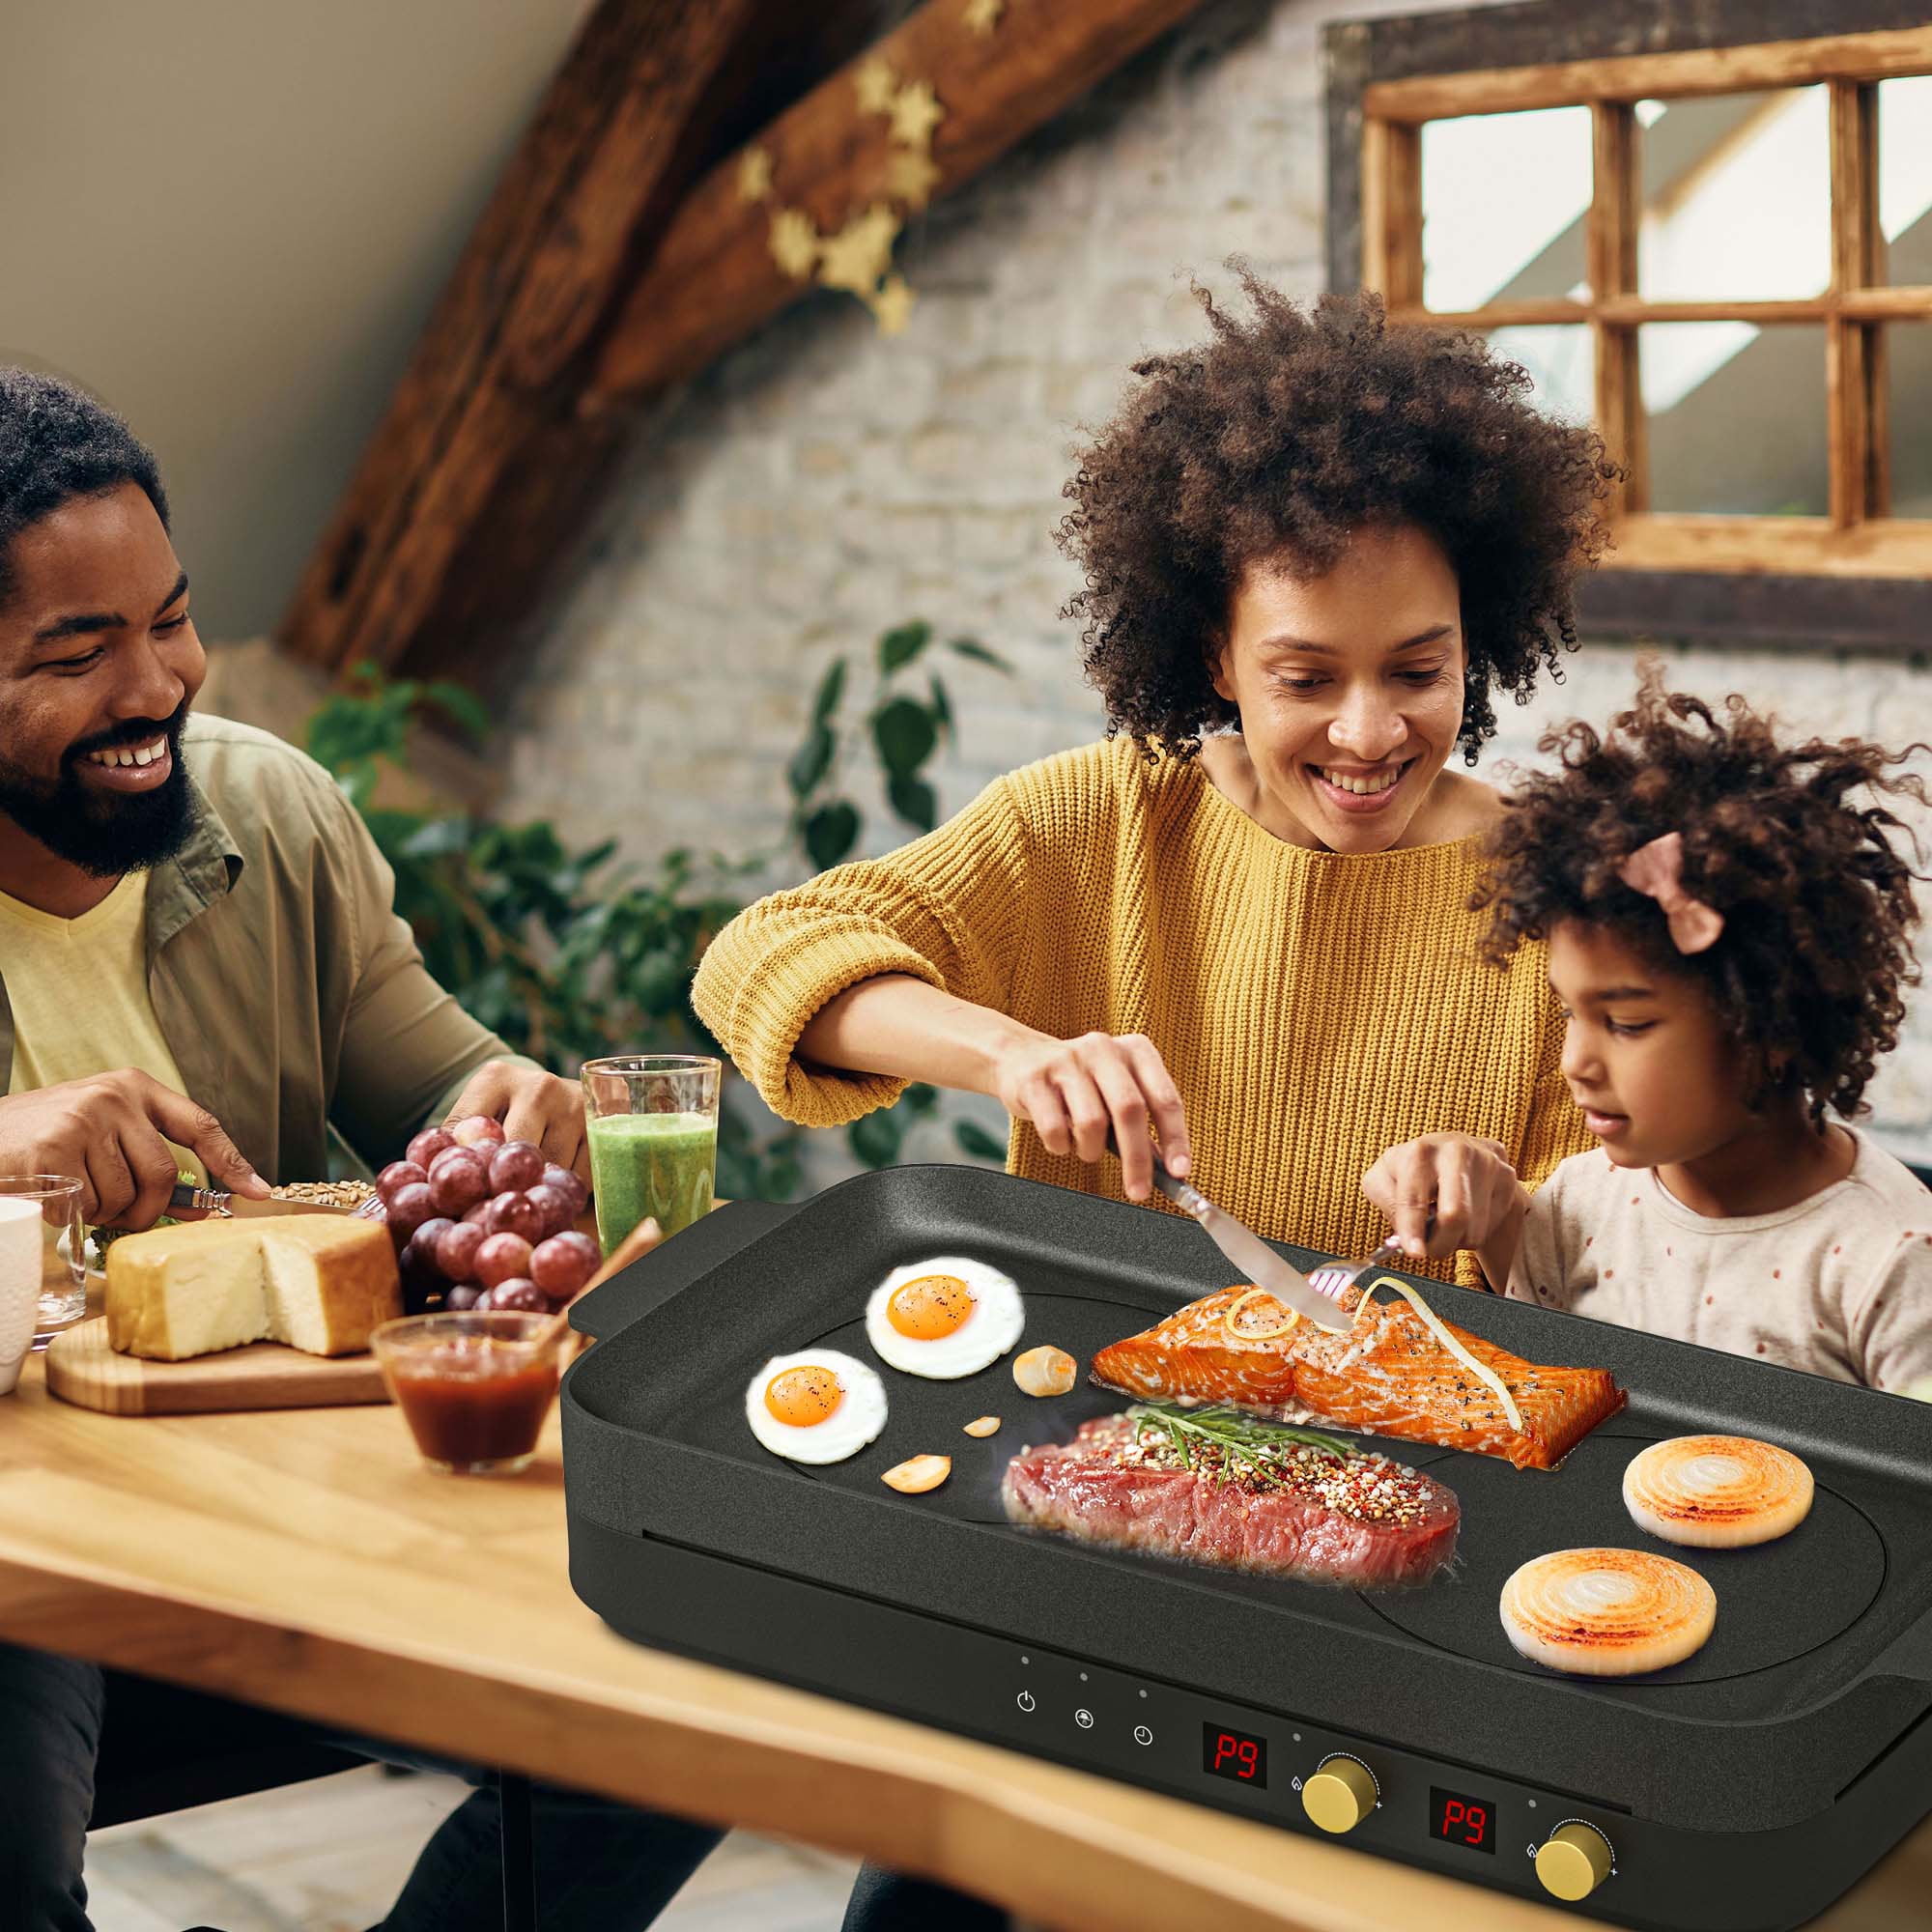 COOKTRON Portable Compact 2 Burner Induction Cooktop Electric Stove  w/Smokeless Cast Iron Griddle Grill & Temperature Control & Child Lock,  Rose Gold